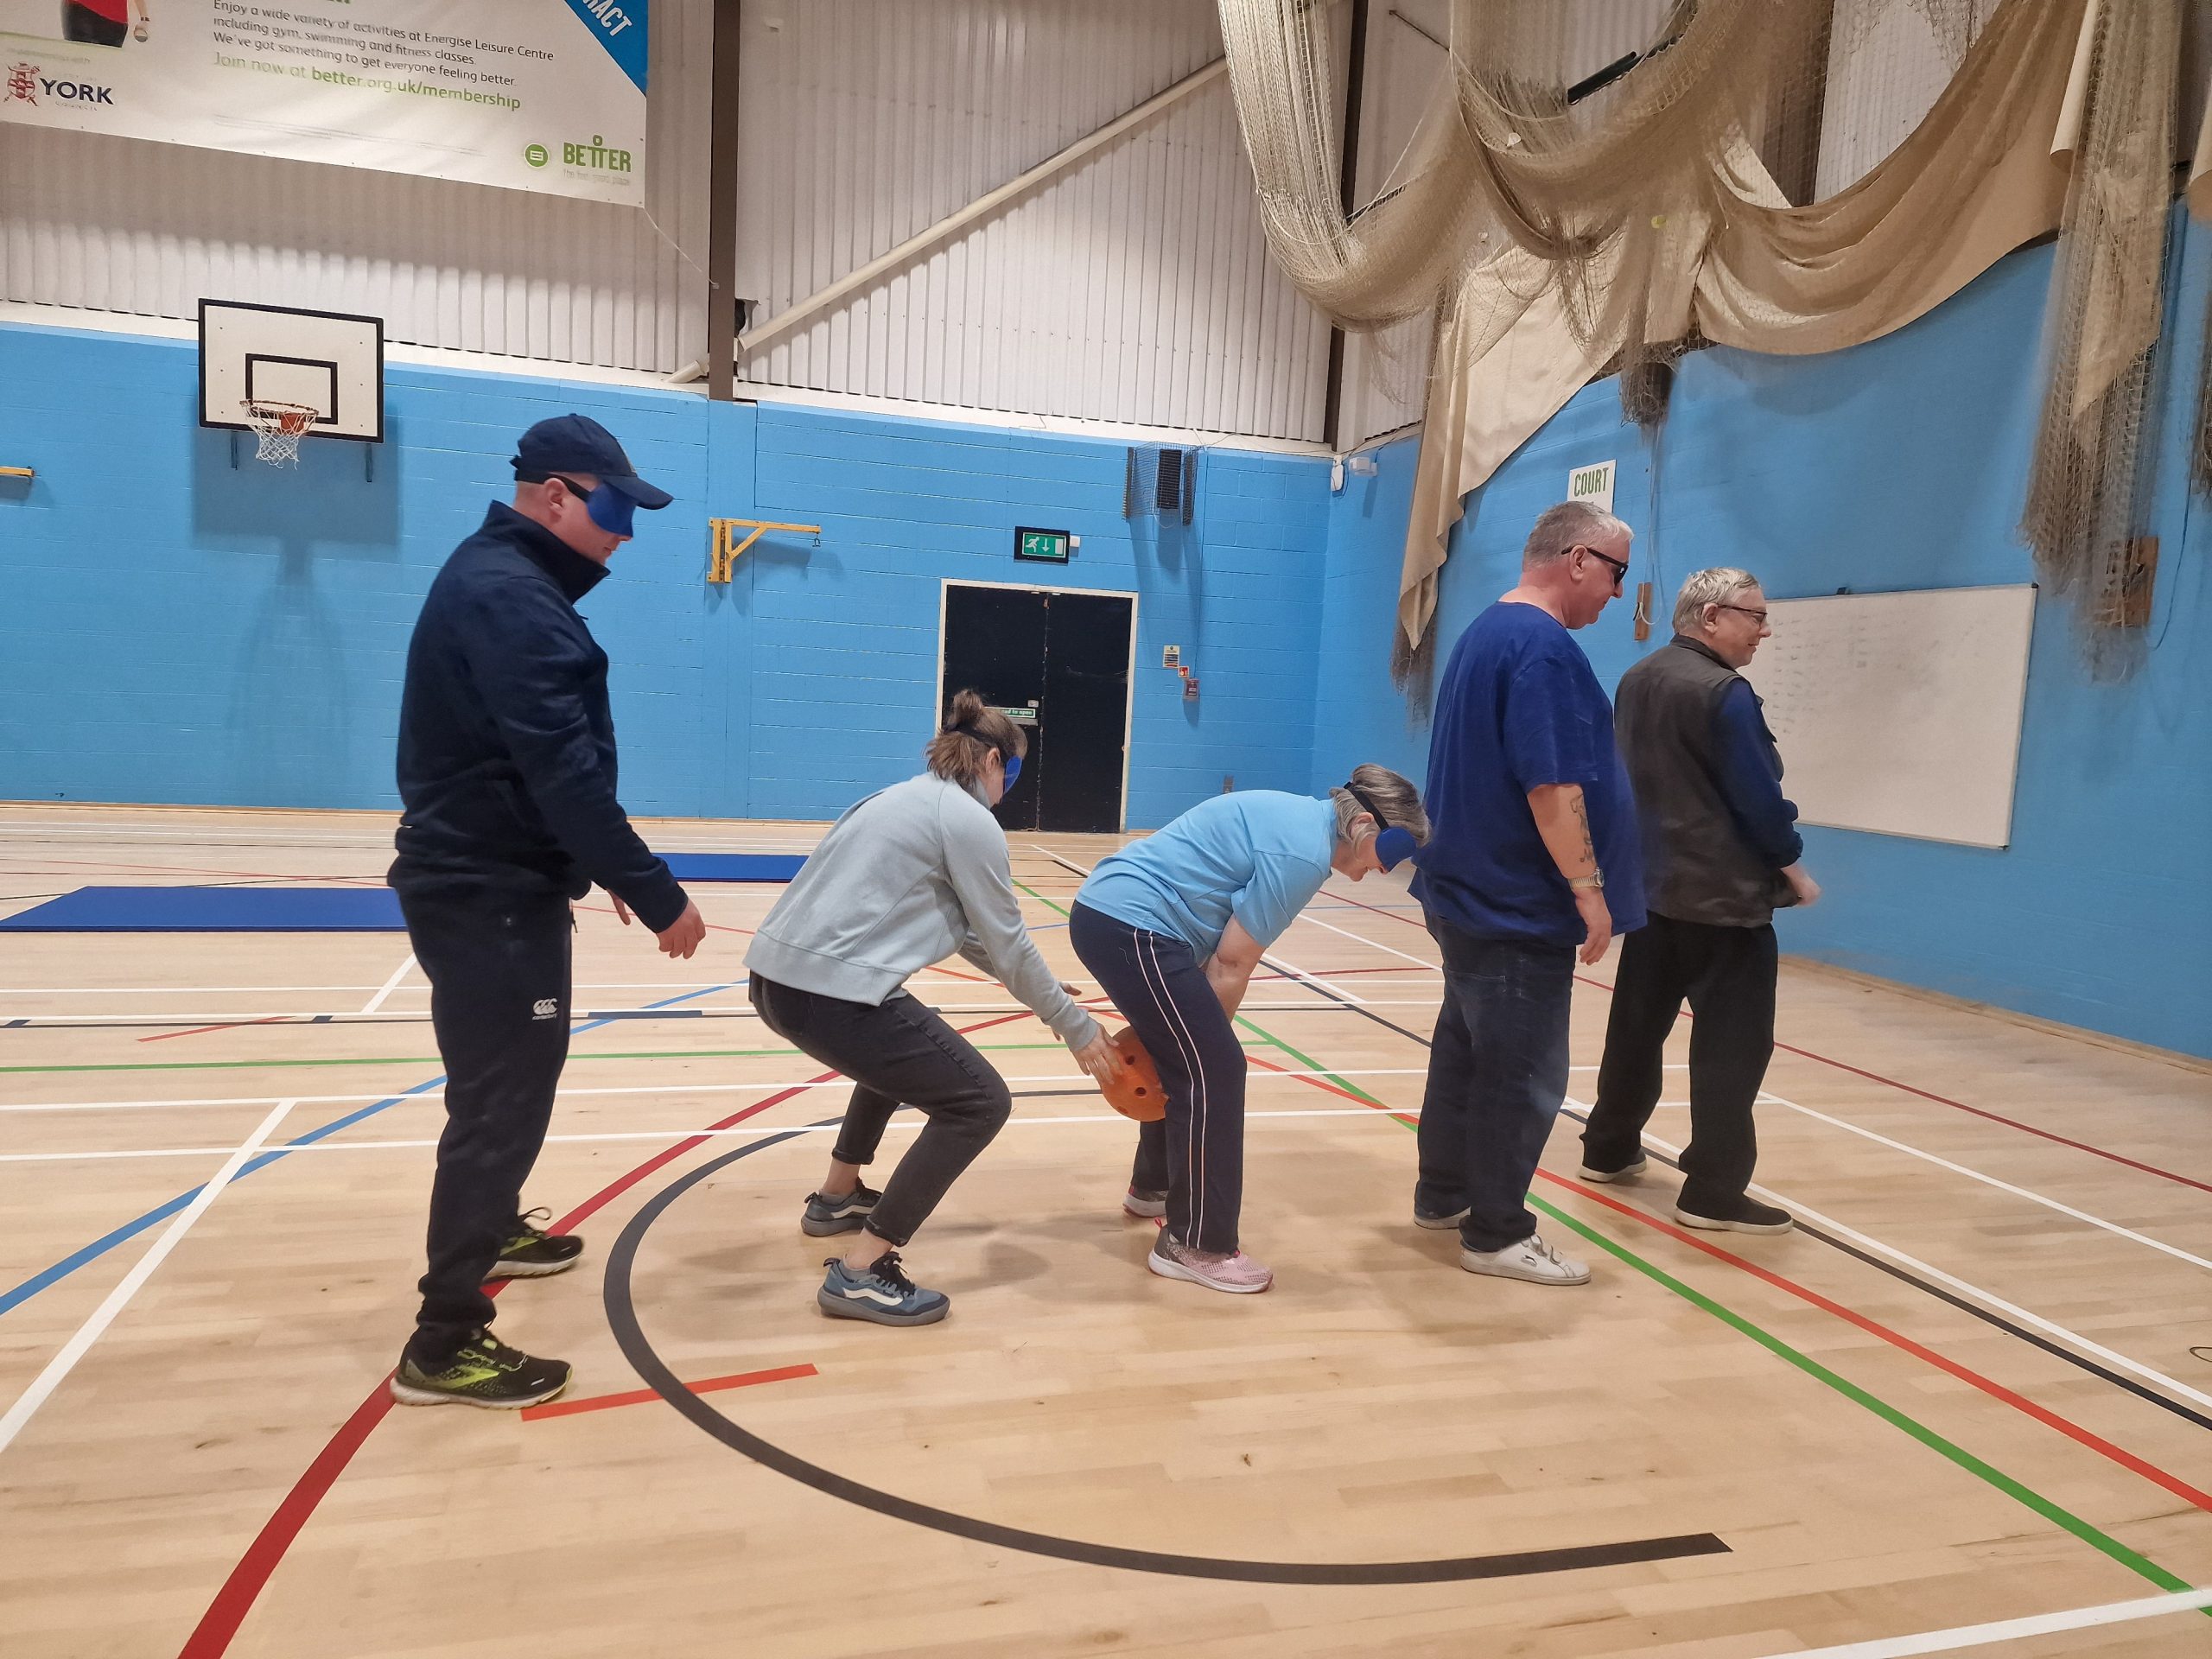 Five attendees stood in a single line during the goalball session, passing the ball to each other, through their legs,